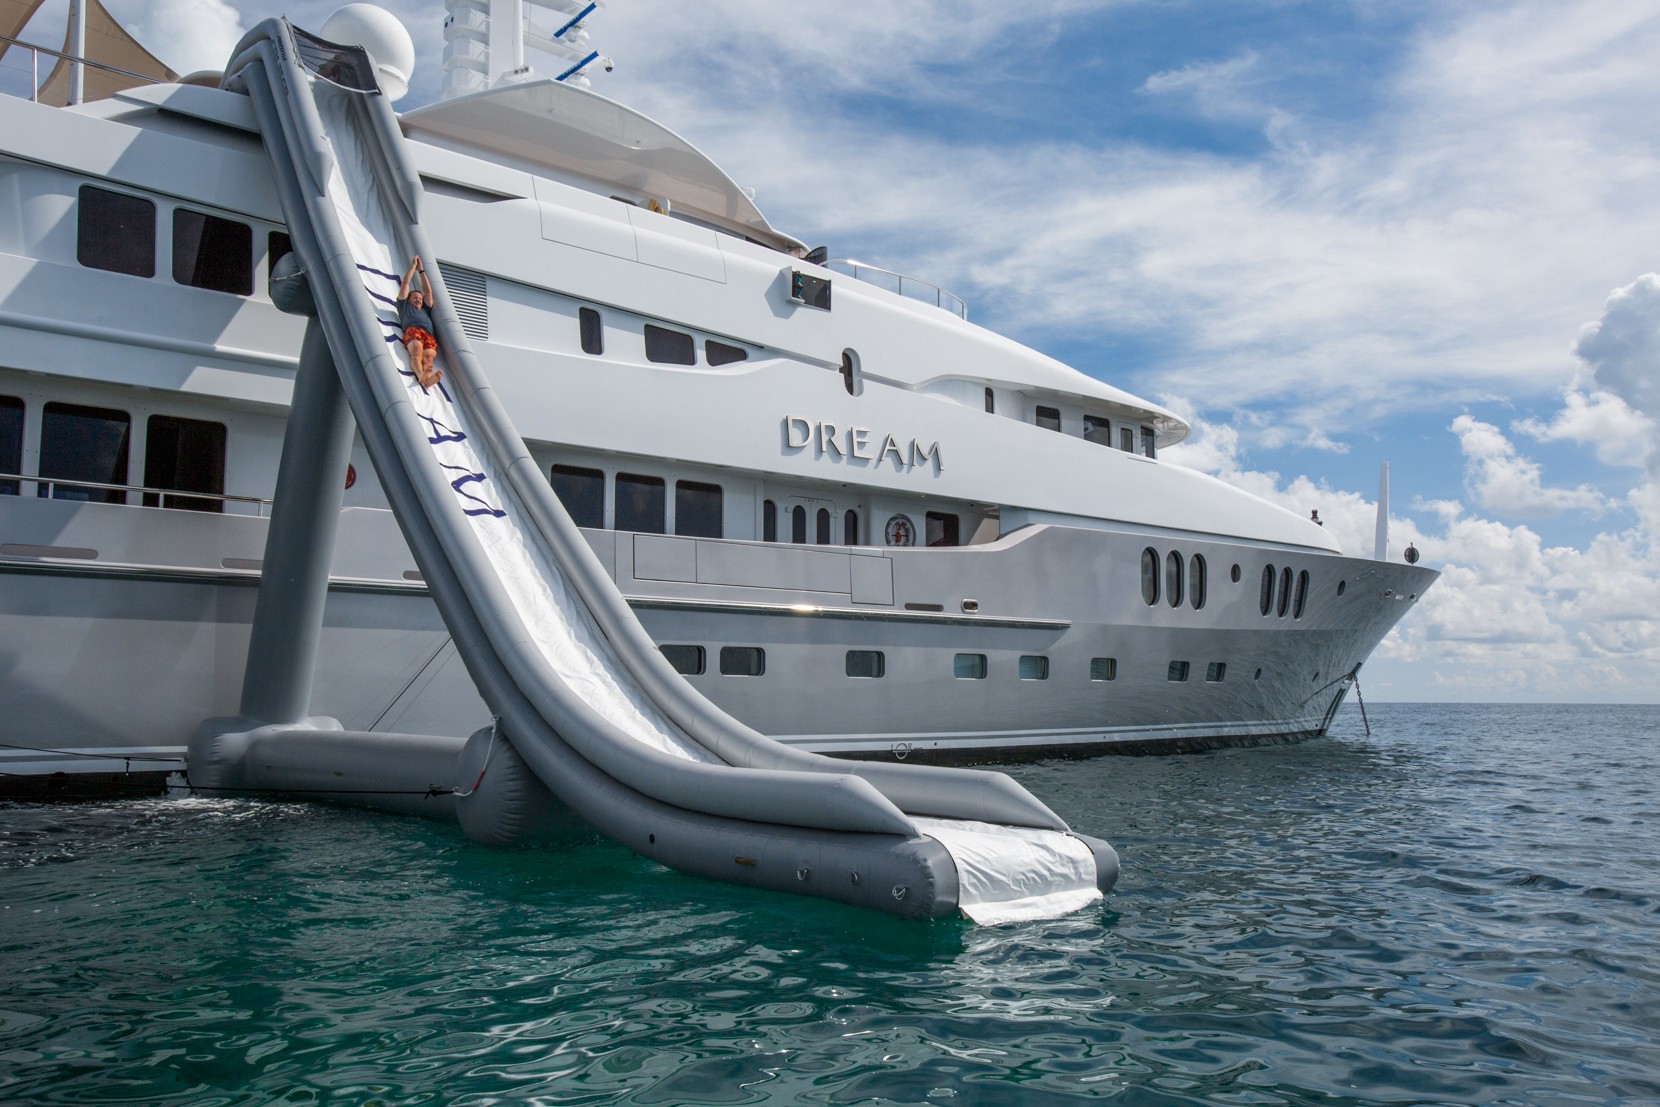 Yacht DREAM by Abeking & Rasmussen - The Epic Water Slide!